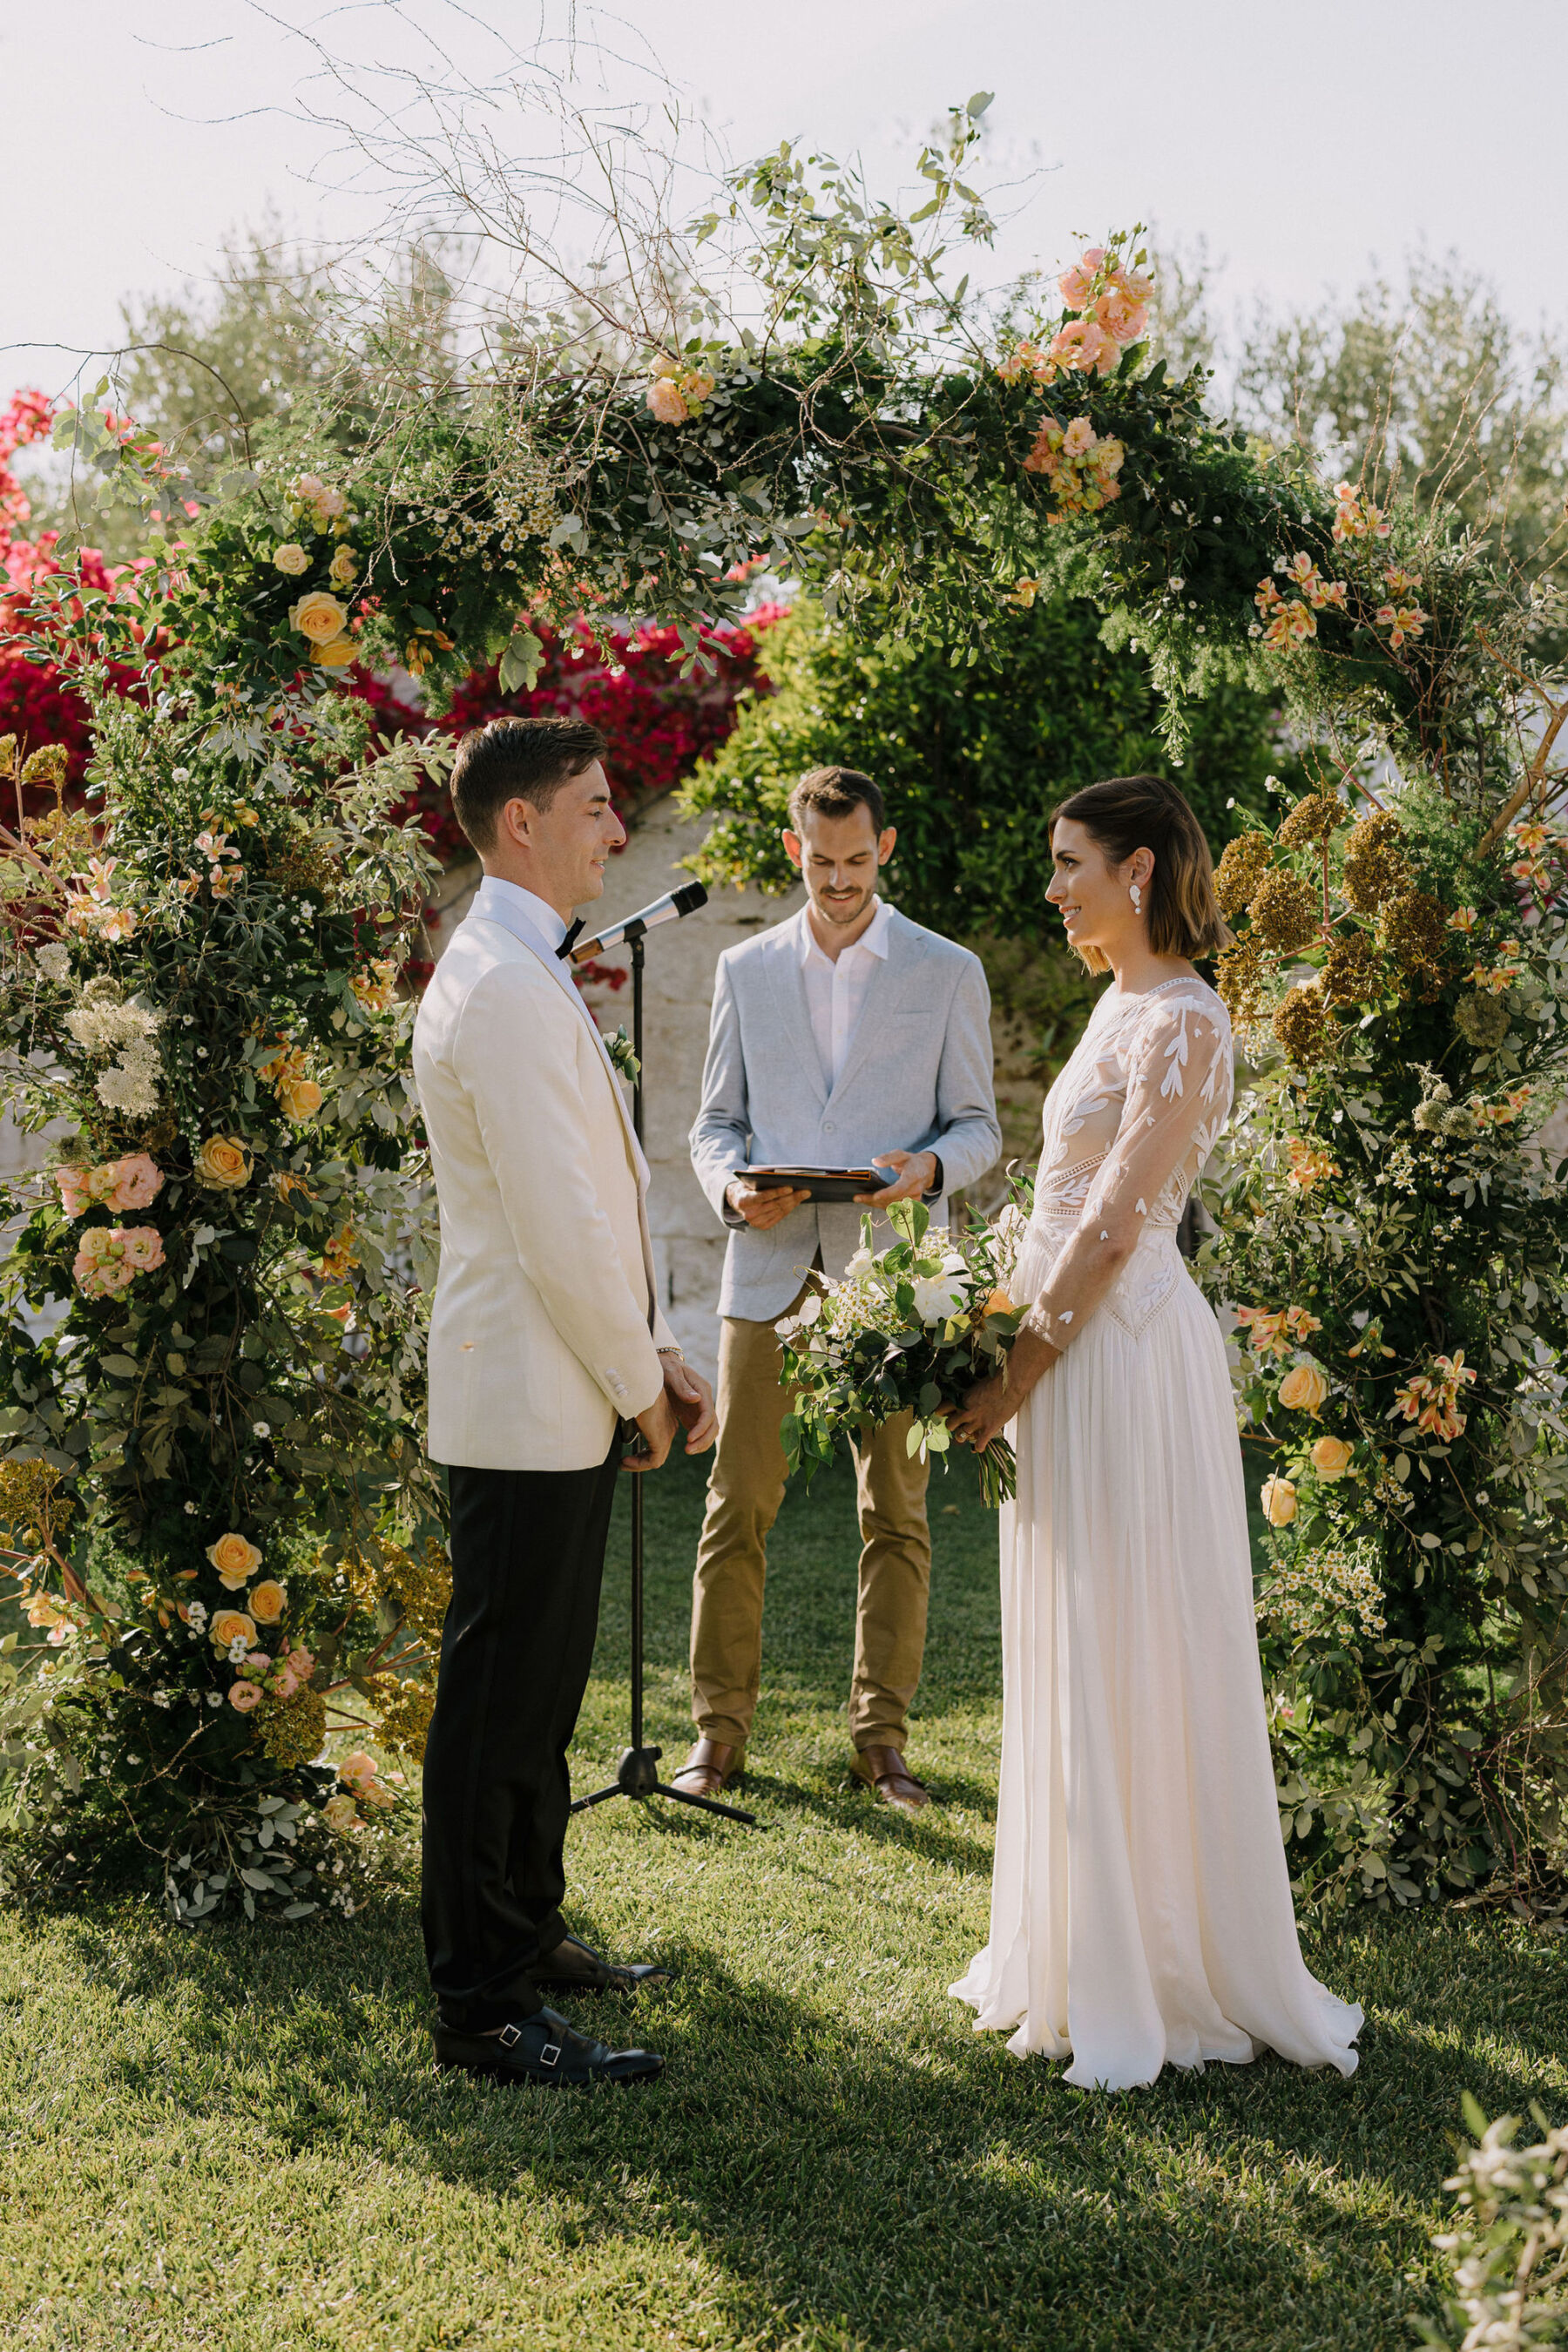 Bride and groom in an outdoor wedding ceremony at an Italian villa, standing by a natural and undone floral arch.